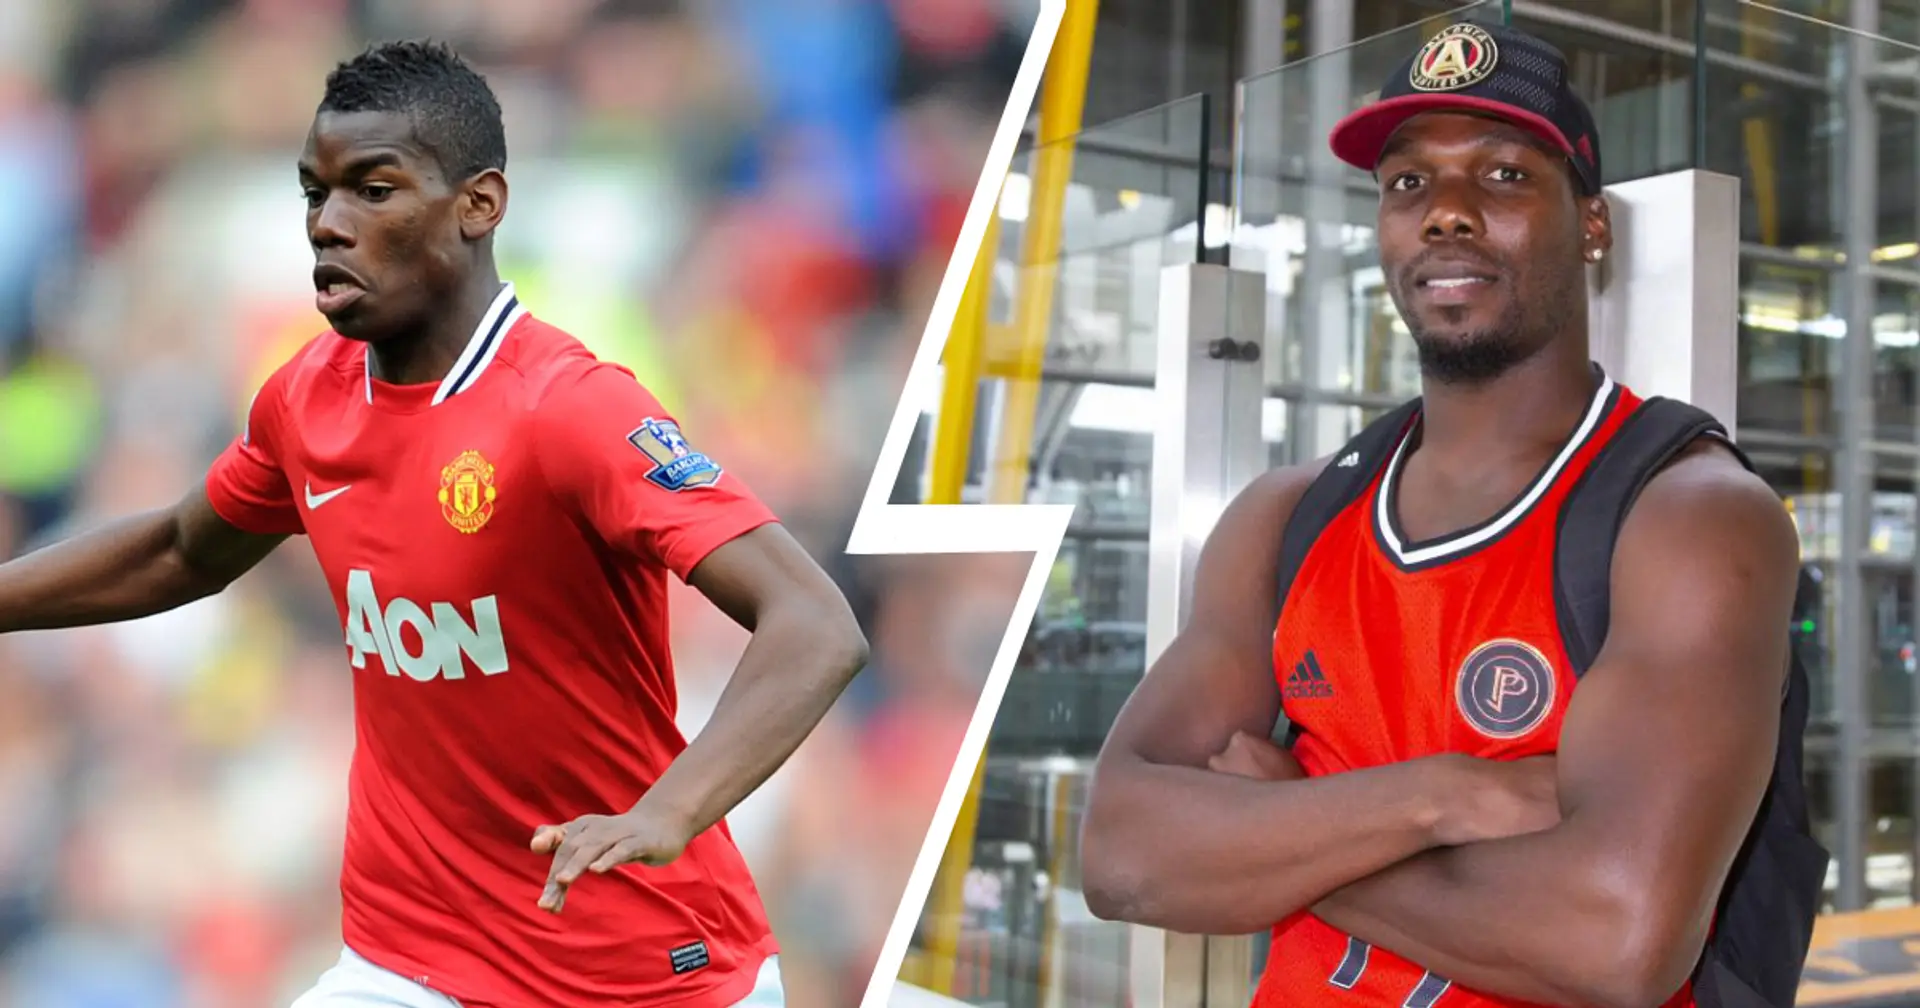 Paul Pogba recalls how he sealed Man United exit after listening to his 'angry' brother Mathias